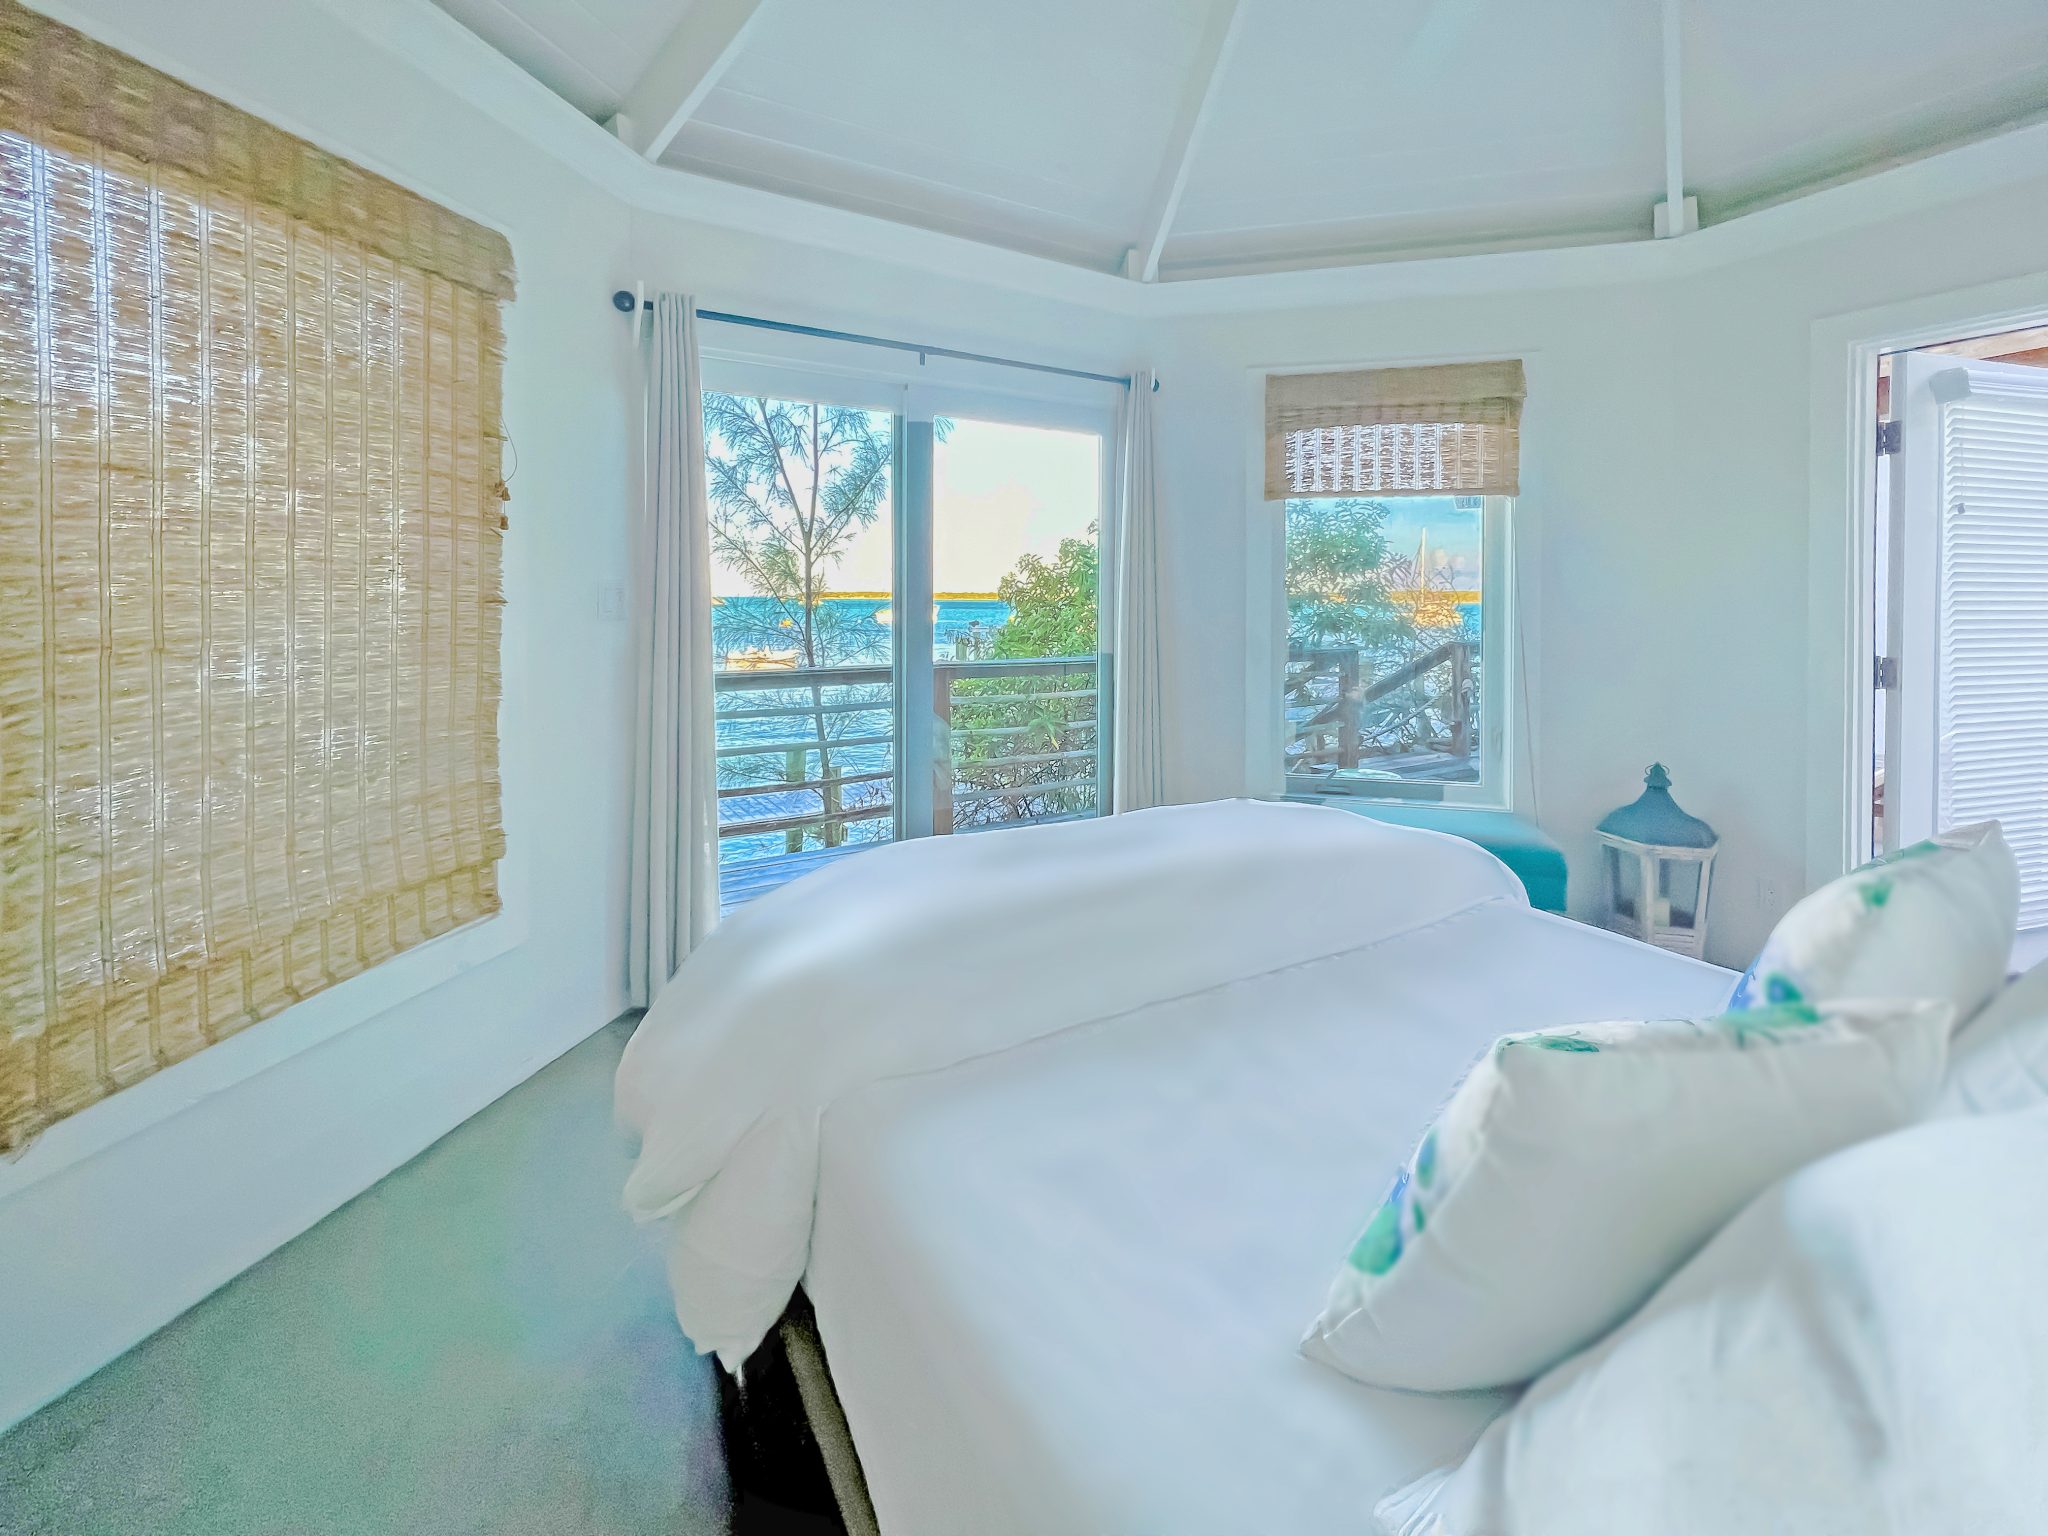 Staniel Cay Vacation Rentals offers a serene bedroom with a white bed and an exquisite view of the ocean.